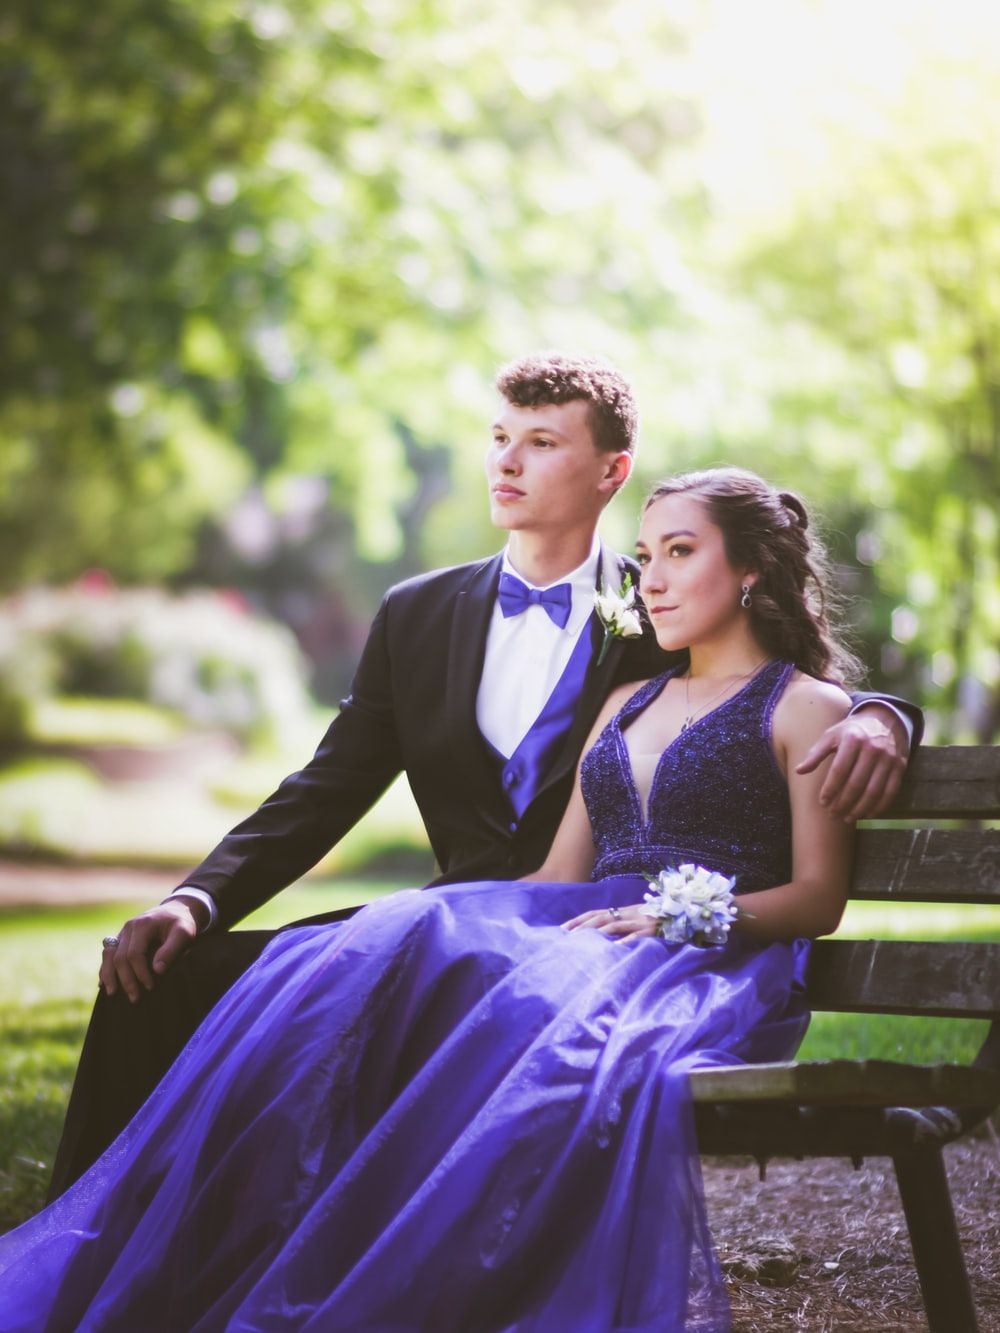 Prom Dresses Picture. Download Free Image